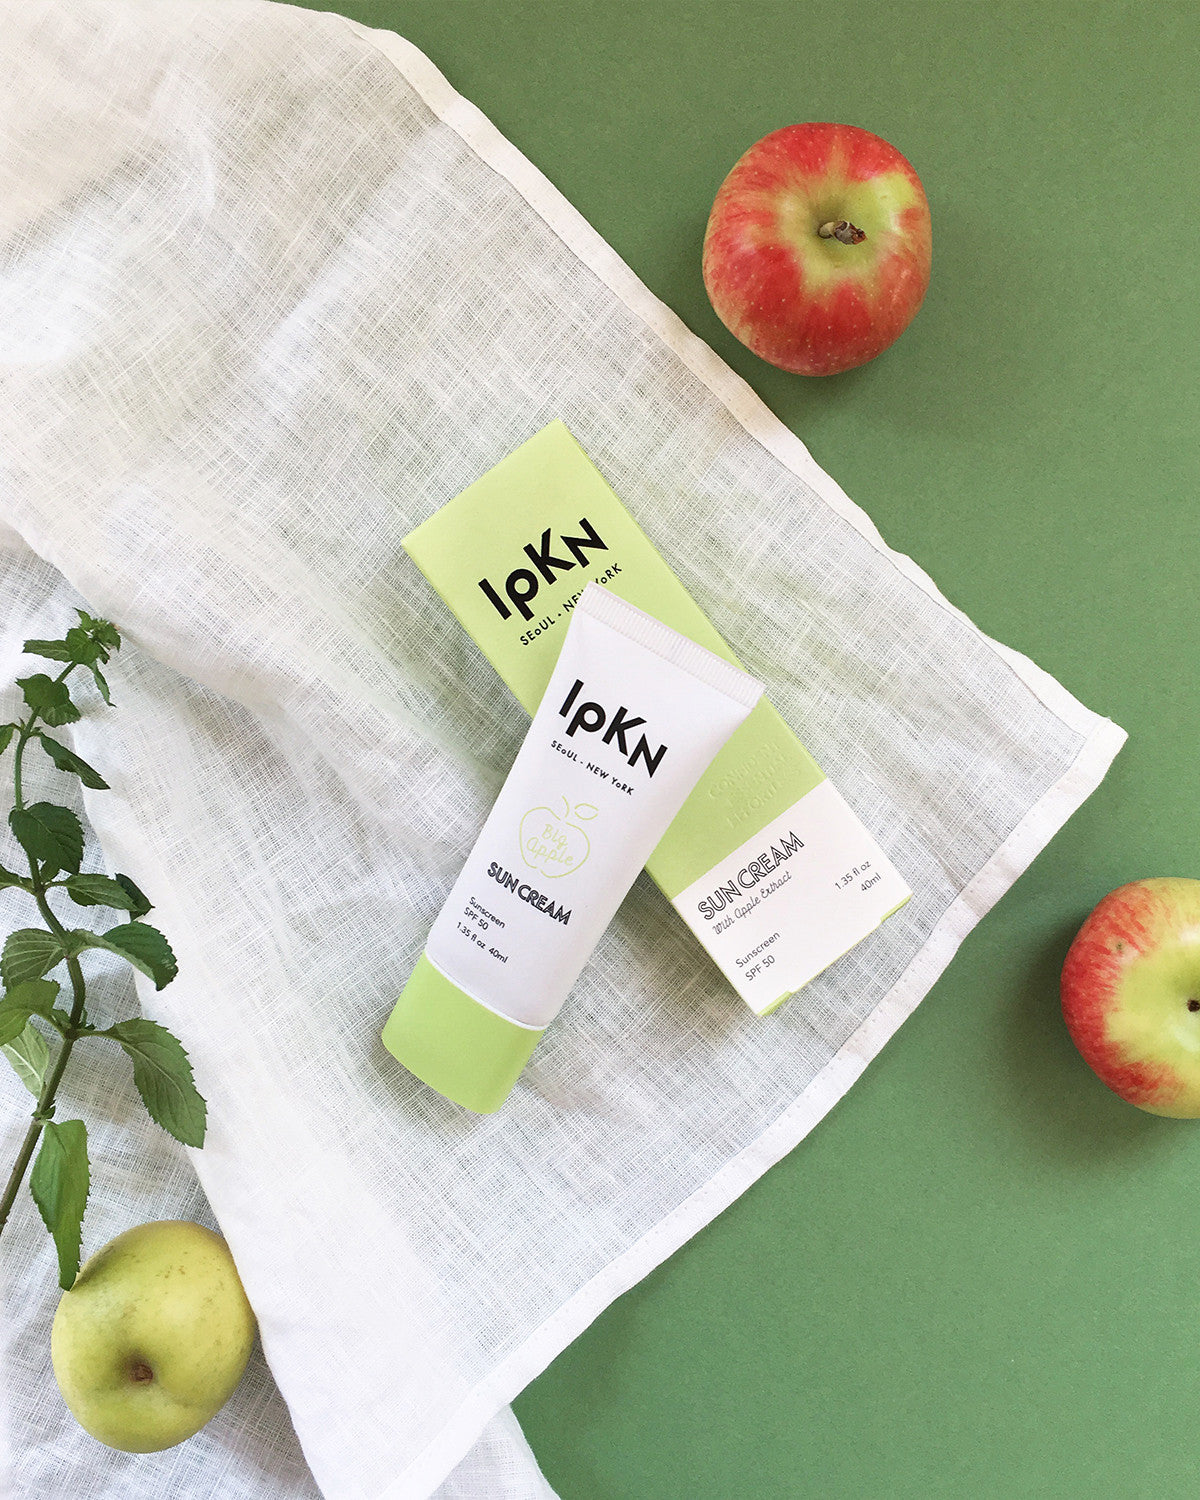 An apple a day does more than just keep the doctor away. A daily dose of this sun cream— infused with apple water extract and natural herbal ingredients—does wonders to our skin. The moisturizing SPF 50+ formula is a potent multitasker—smoothing, color correcting, and protecting skin all day long. It even helps reduce sebum production, so your complexion stays glowing, not greasy.